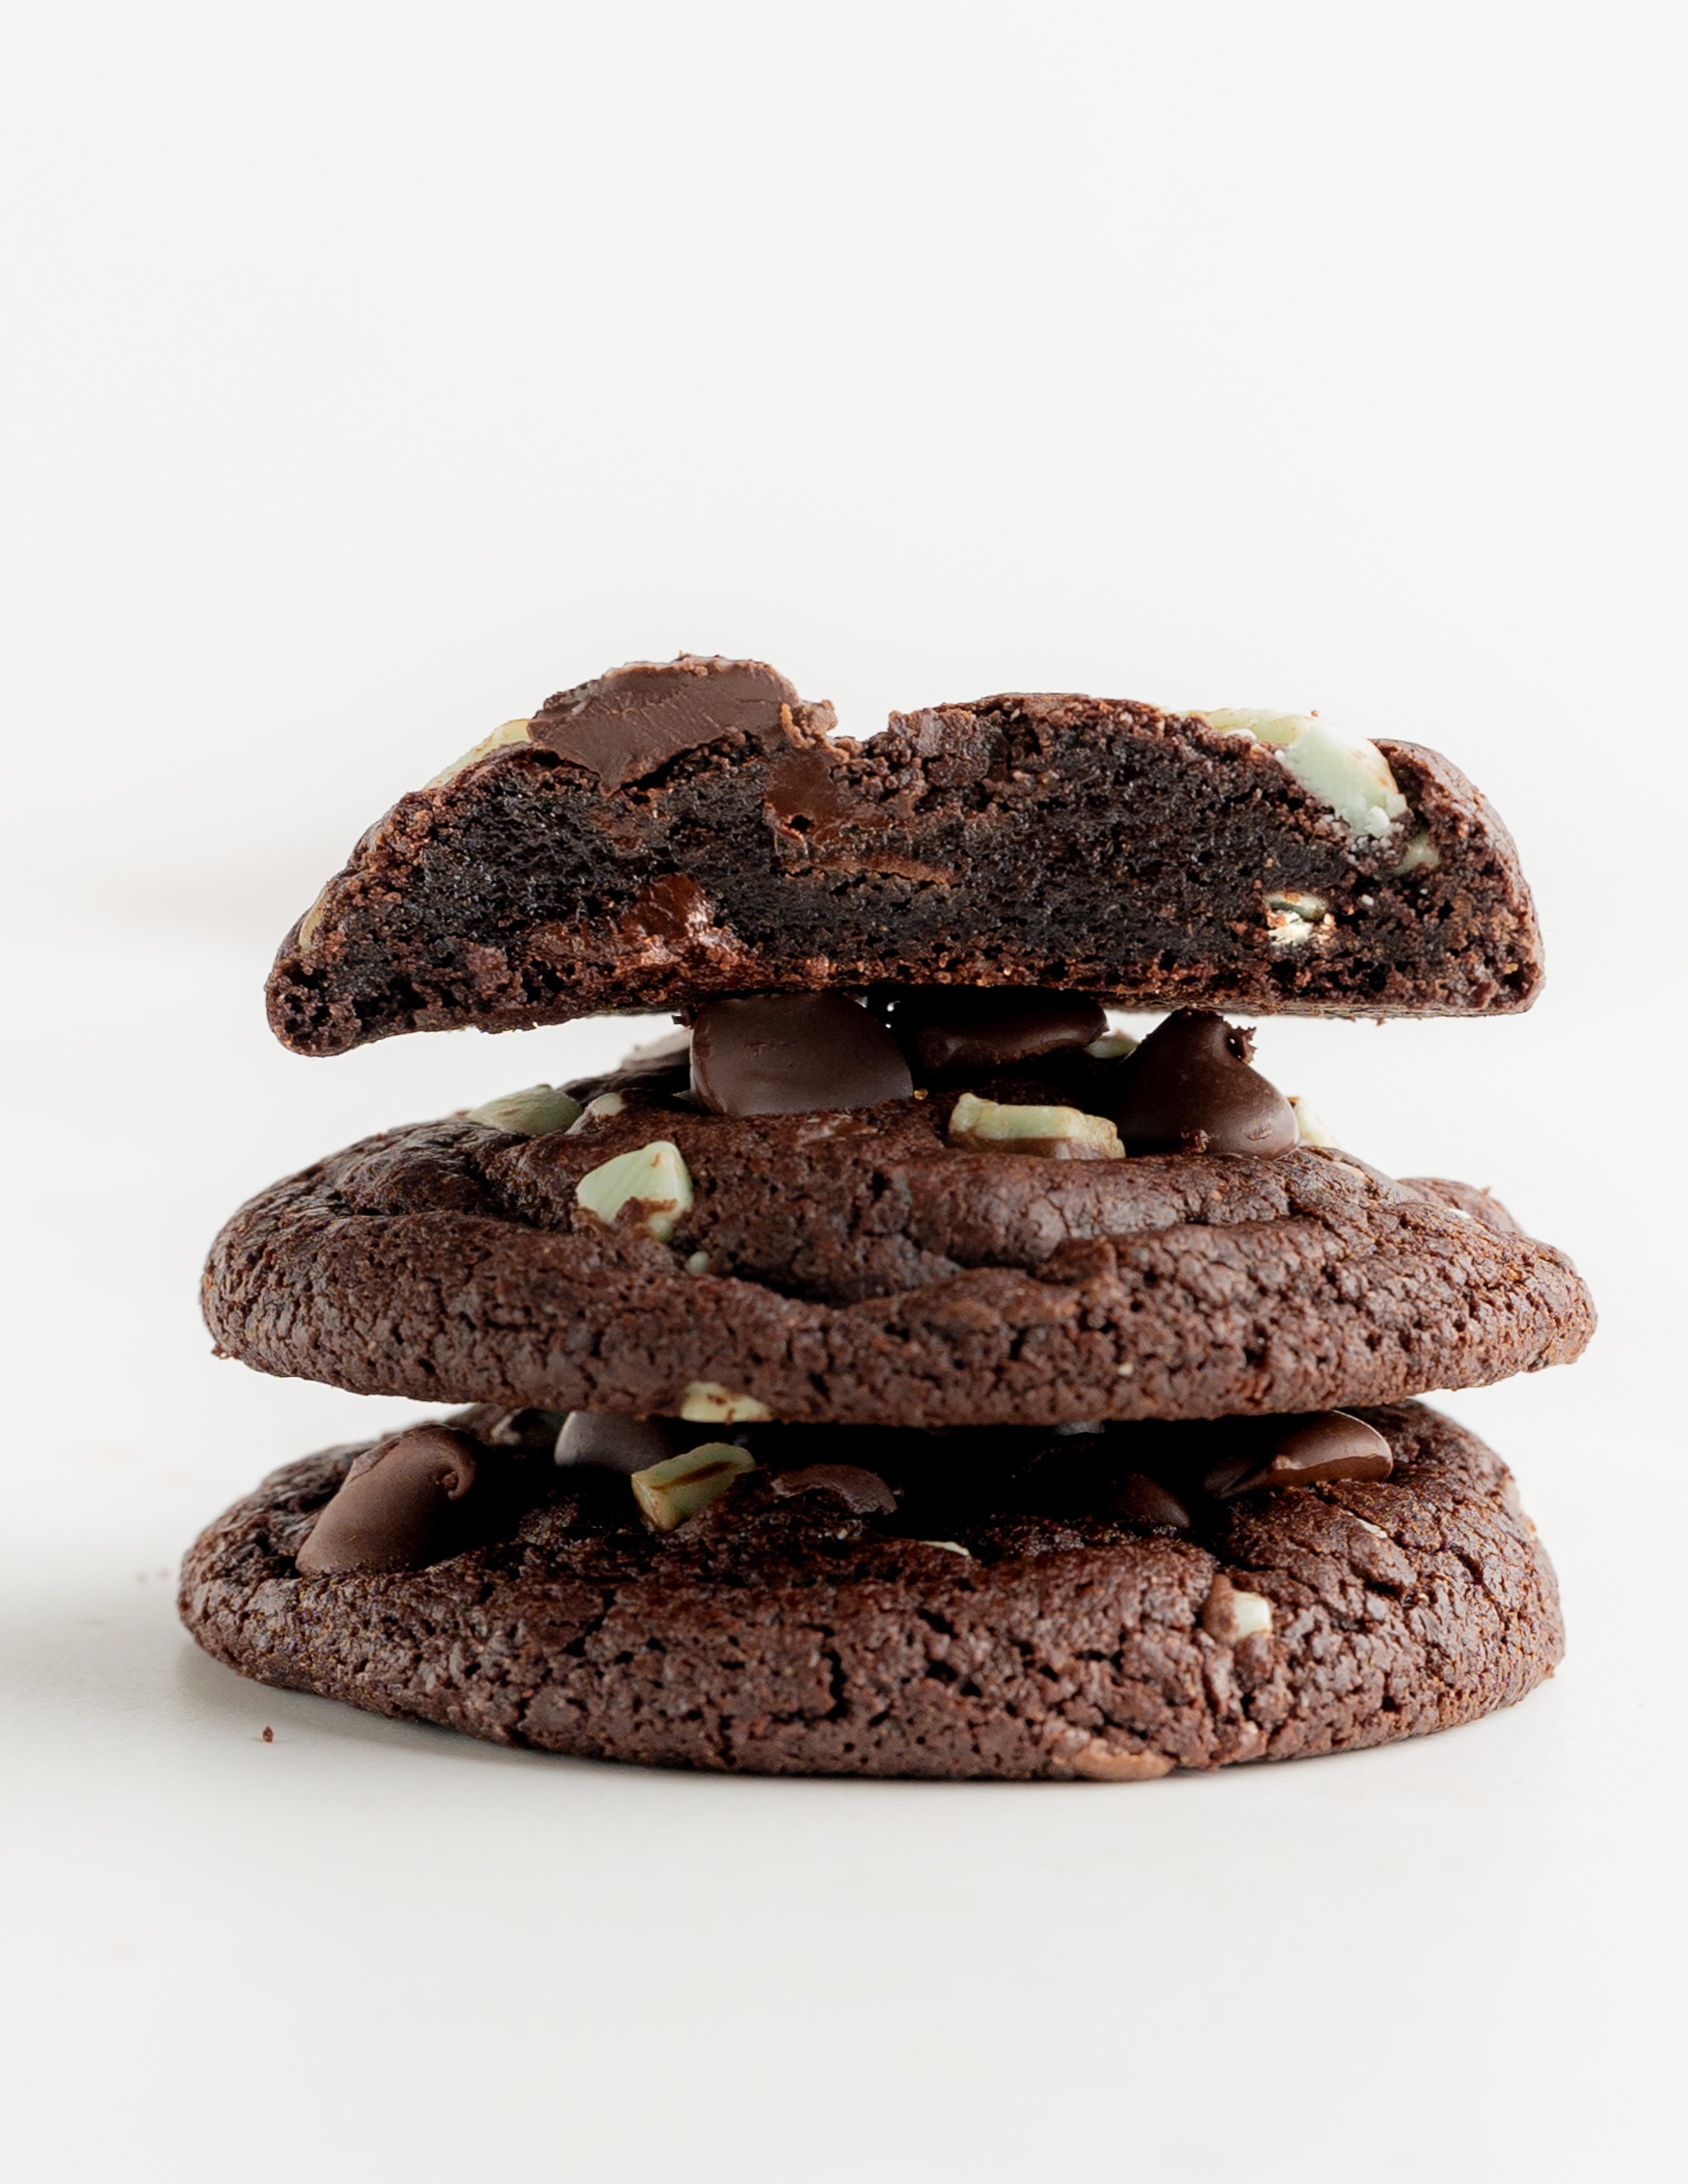 A stack of three chocolate mint cookies, with the top cookies slices in half to see the fudgy center.